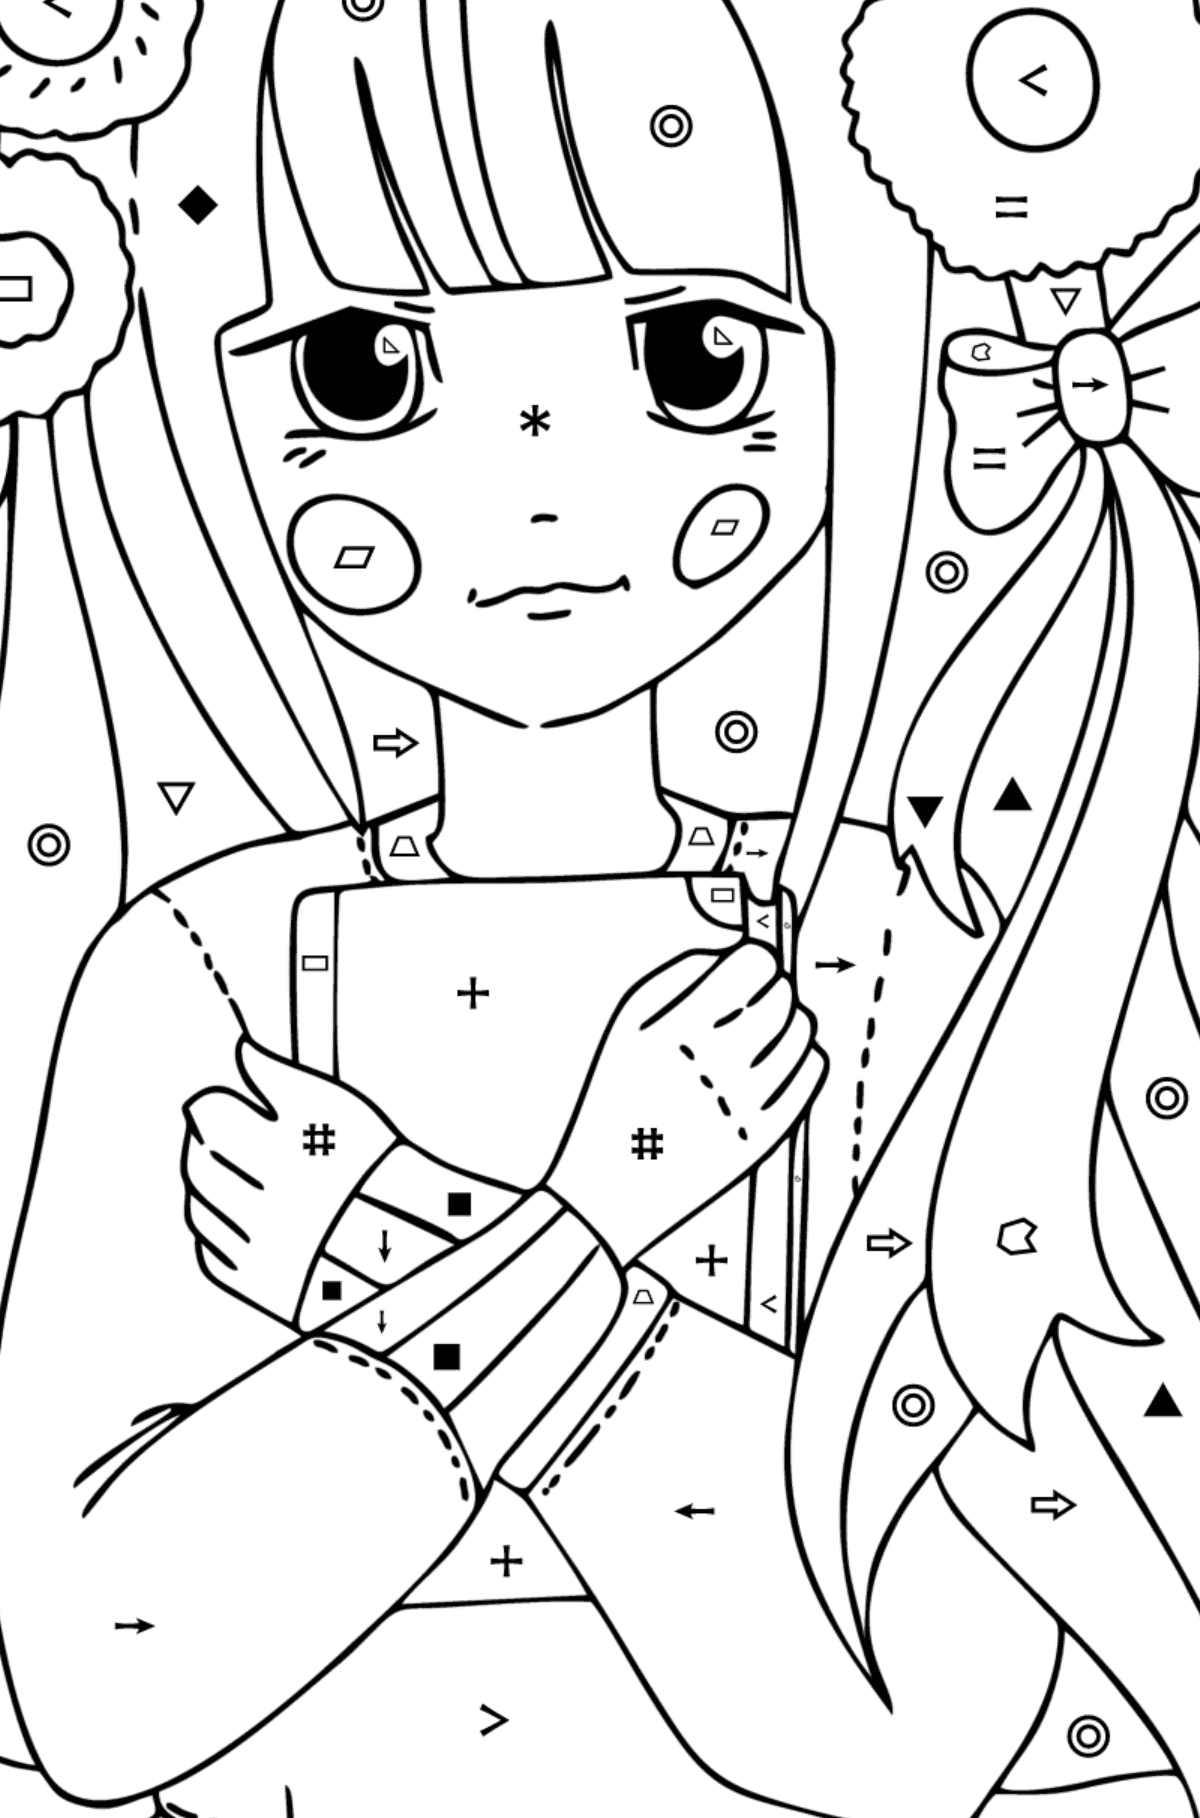 Zen girl coloring page - Coloring by Symbols and Geometric Shapes for Kids